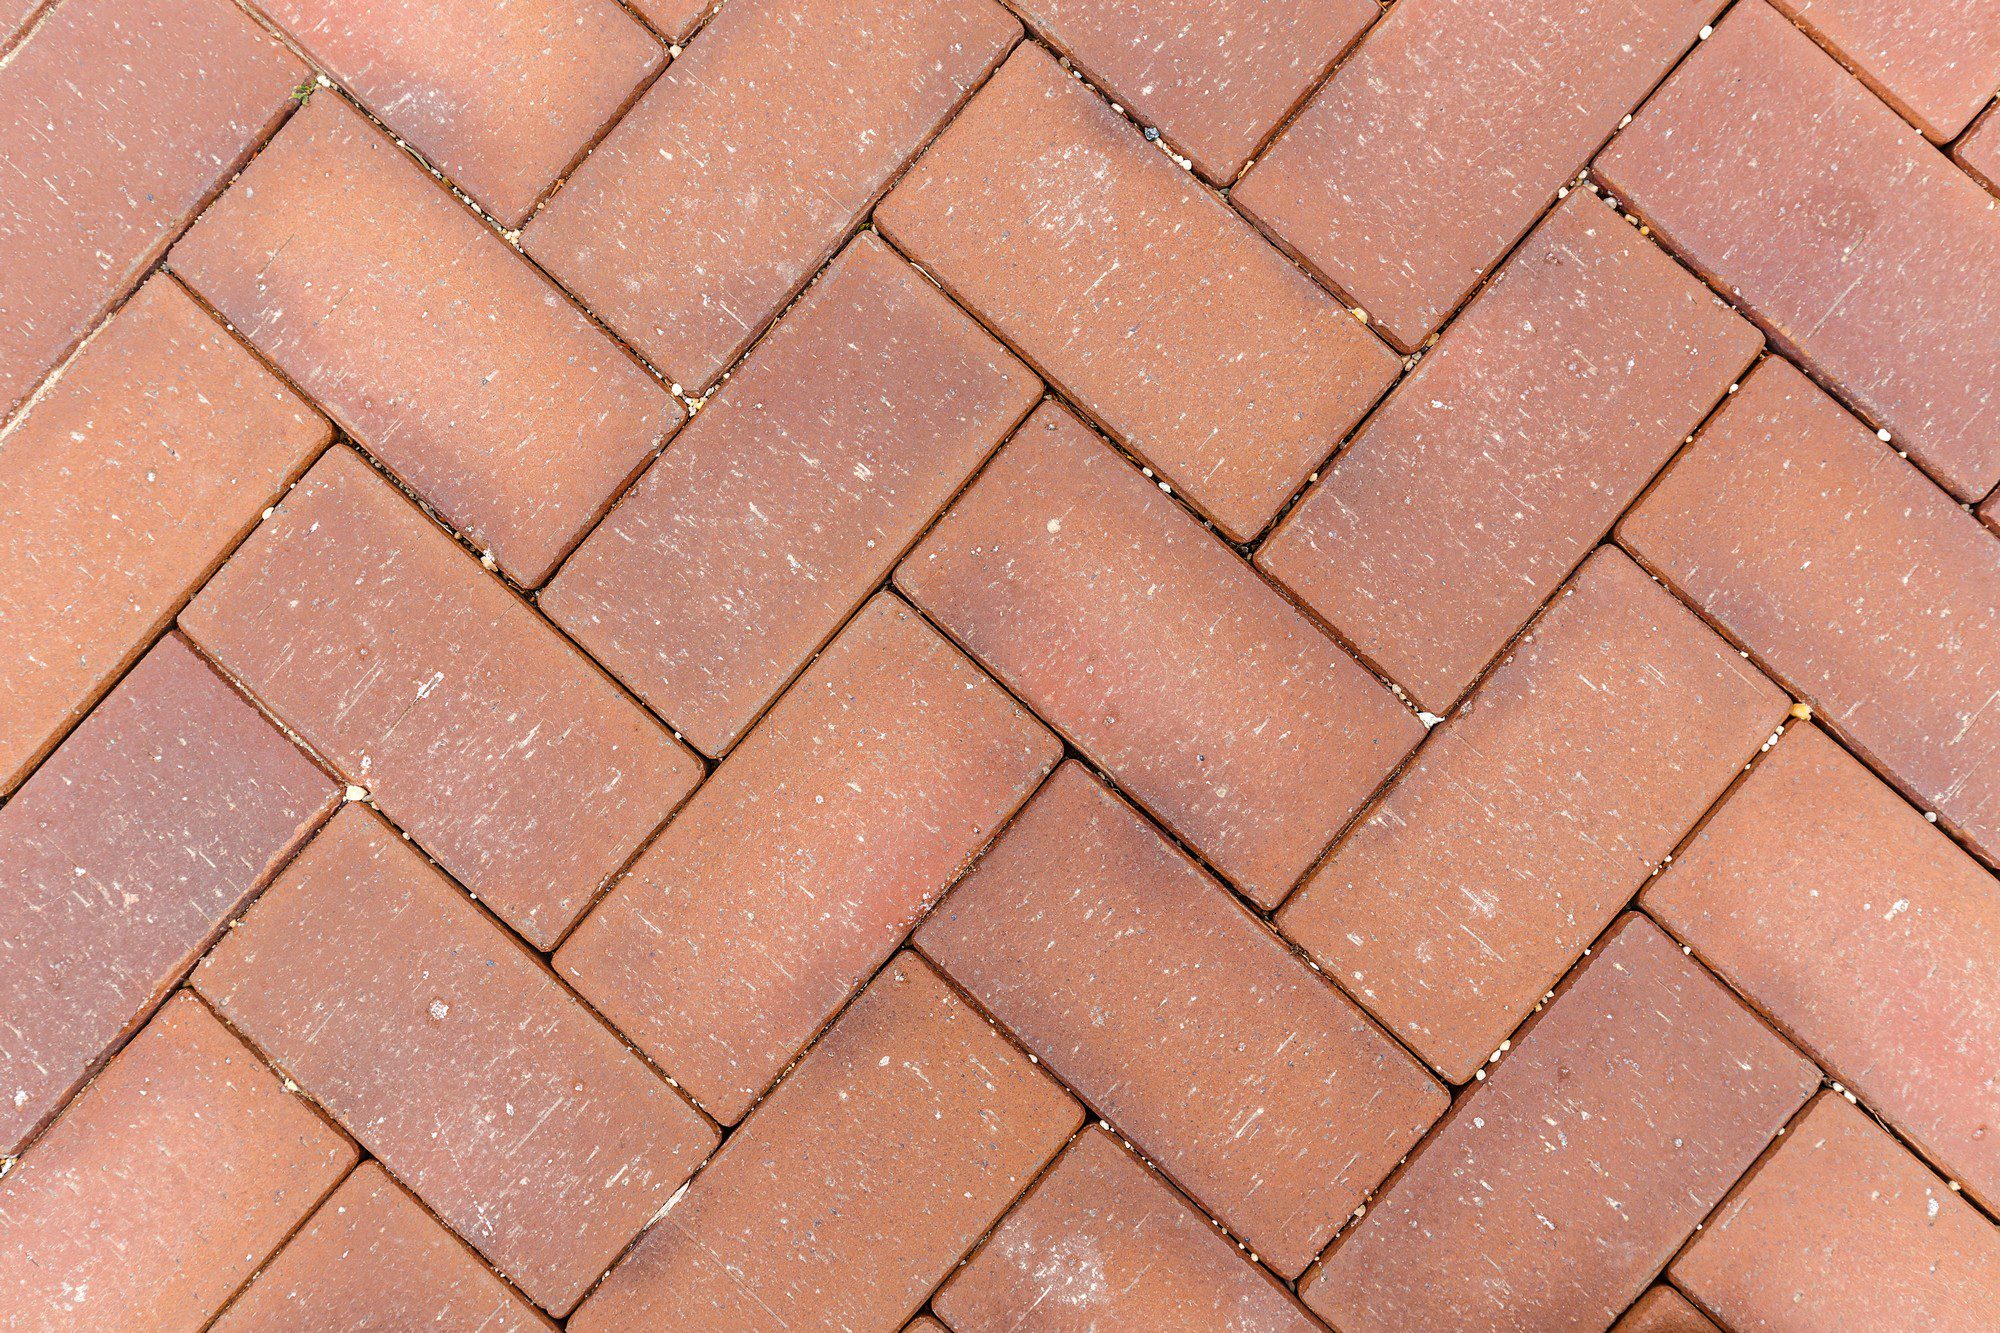 This image shows a pattern of interlocking brick pavers commonly used for outdoor paving. The bricks are laid in a herringbone pattern, which is known for its strong interlock and visual appeal. Each brick is rectangular and appears to be in a reddish-brown colour, and there are small gaps filled with sand or another fine material between the bricks to help hold them in place and allow for drainage. The pavers are slightly weathered, indicating they have been in place for some time.